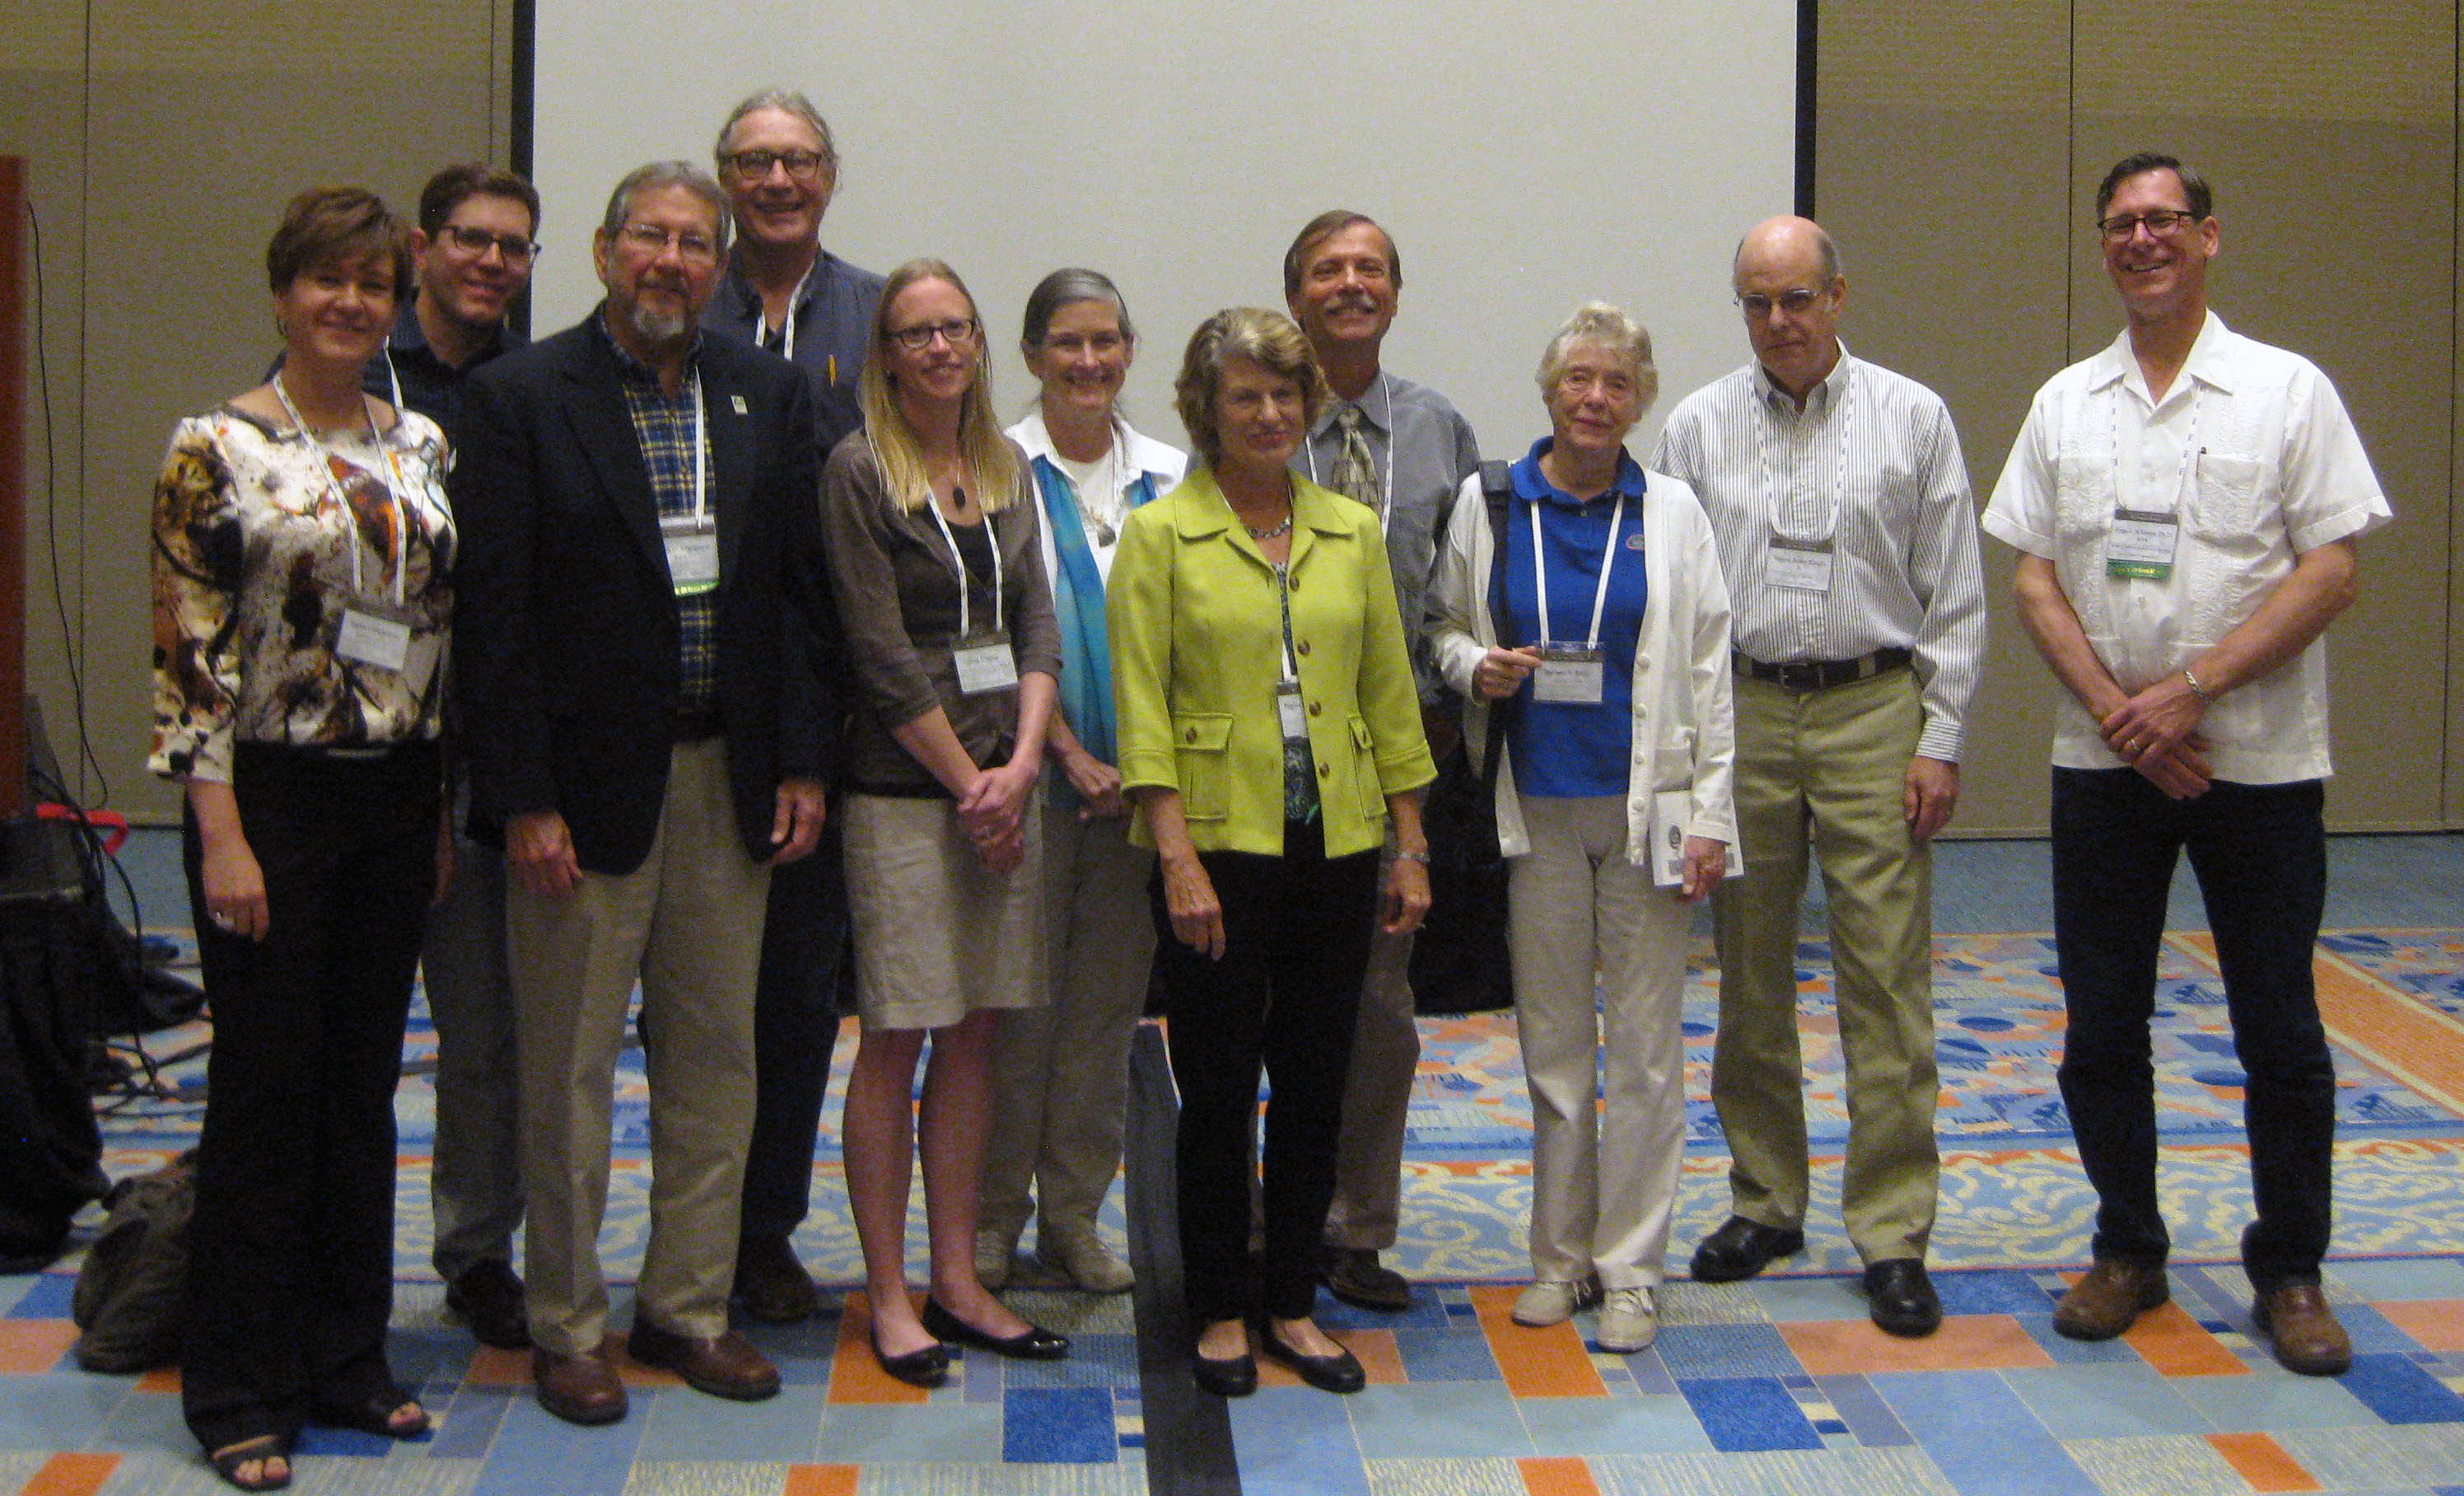 Image of presenters at the 2016 Society for American Archaeology symposium The Archaeology, Art, and Iconography of Florida’s Watery Landscapes with Barbara A. Purdy. From left: Joanna Ostapkowicz, Dan Seinfeld, Bill Marquardt, Michael Faught, Julia Duggins, Karen Jo Walker, Phyllis Kolianos, Steven Koski, Barbara Purdy, Jim Knight, and Ryan Wheeler.